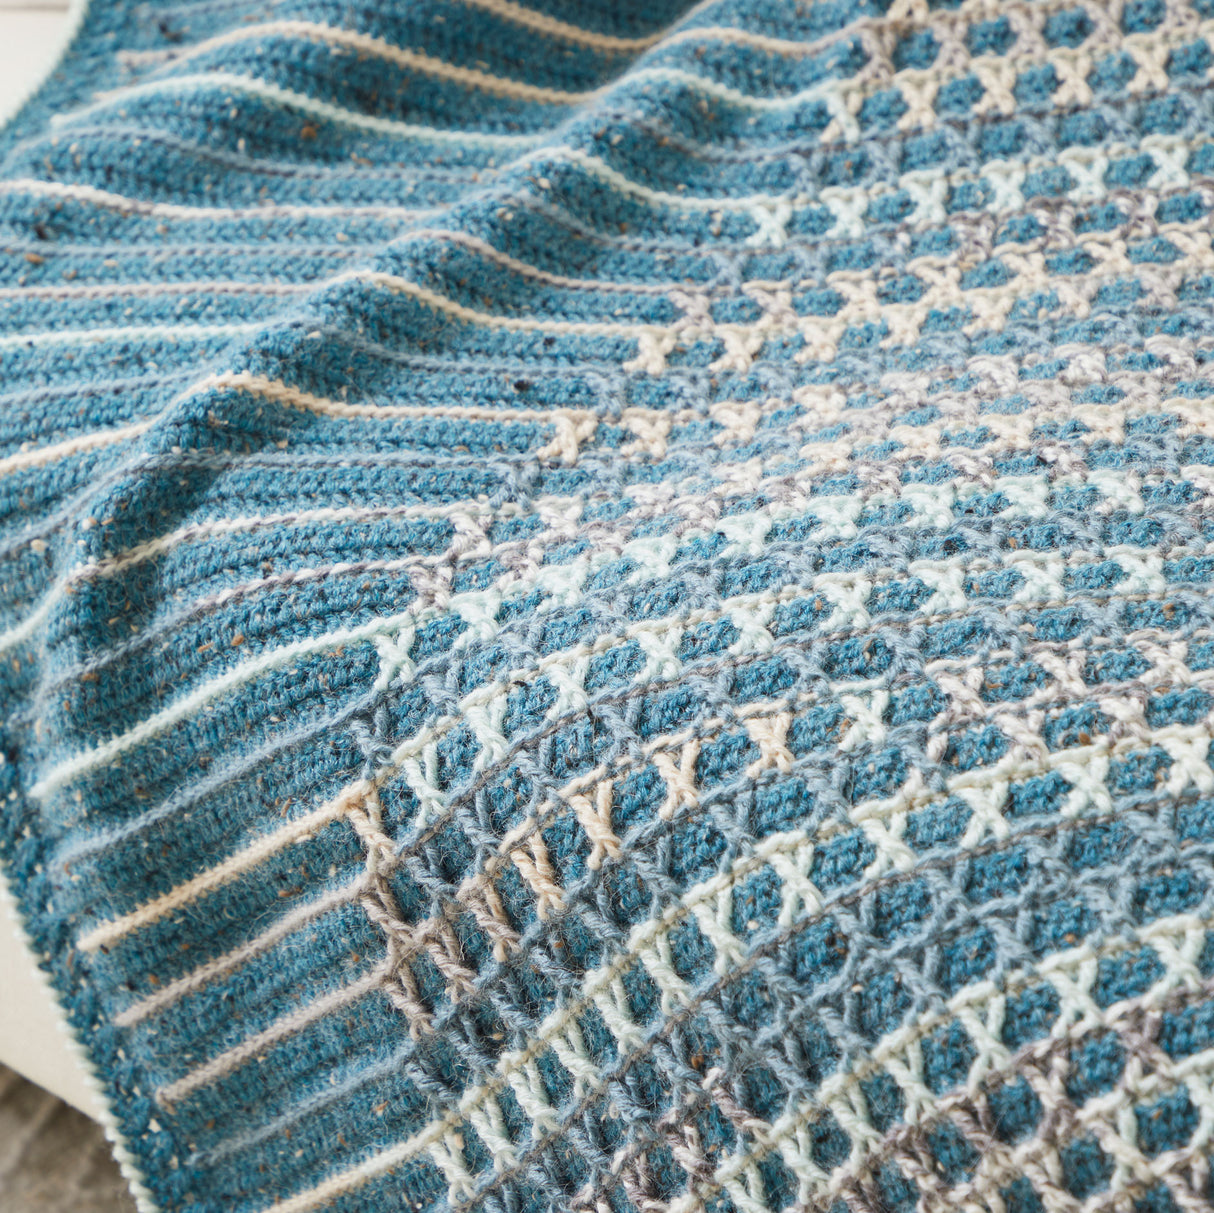 Caned Stitches Throw